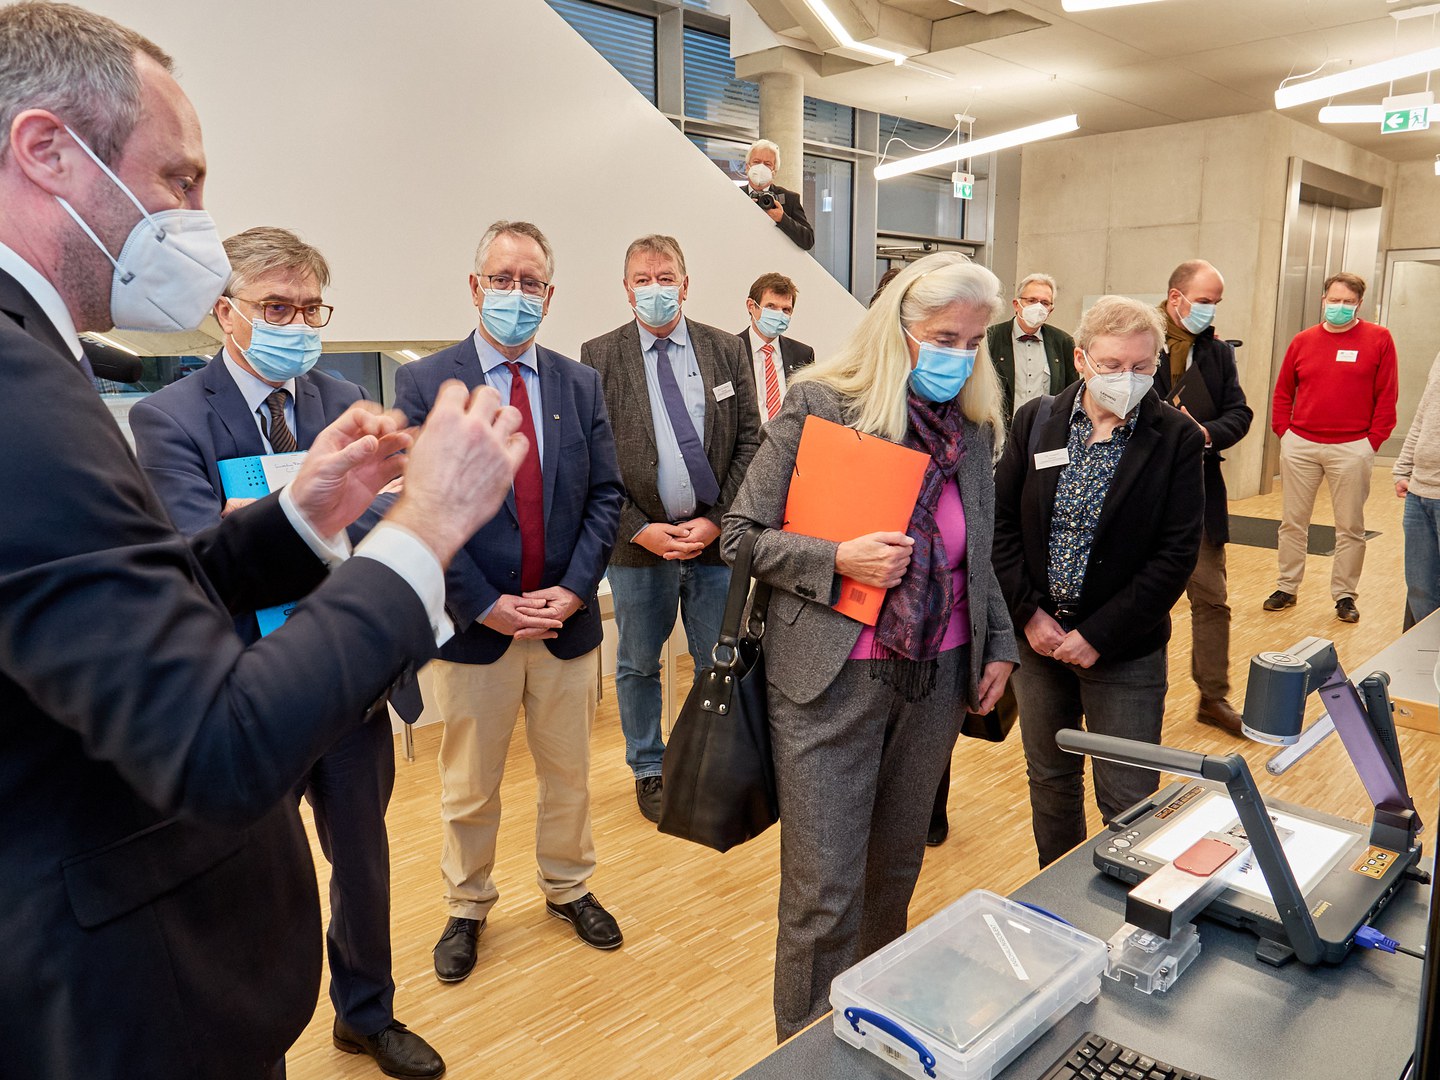 Prof. Dr. Jochen Dingfelder (right) explains to guests a component needed for detector measurements.